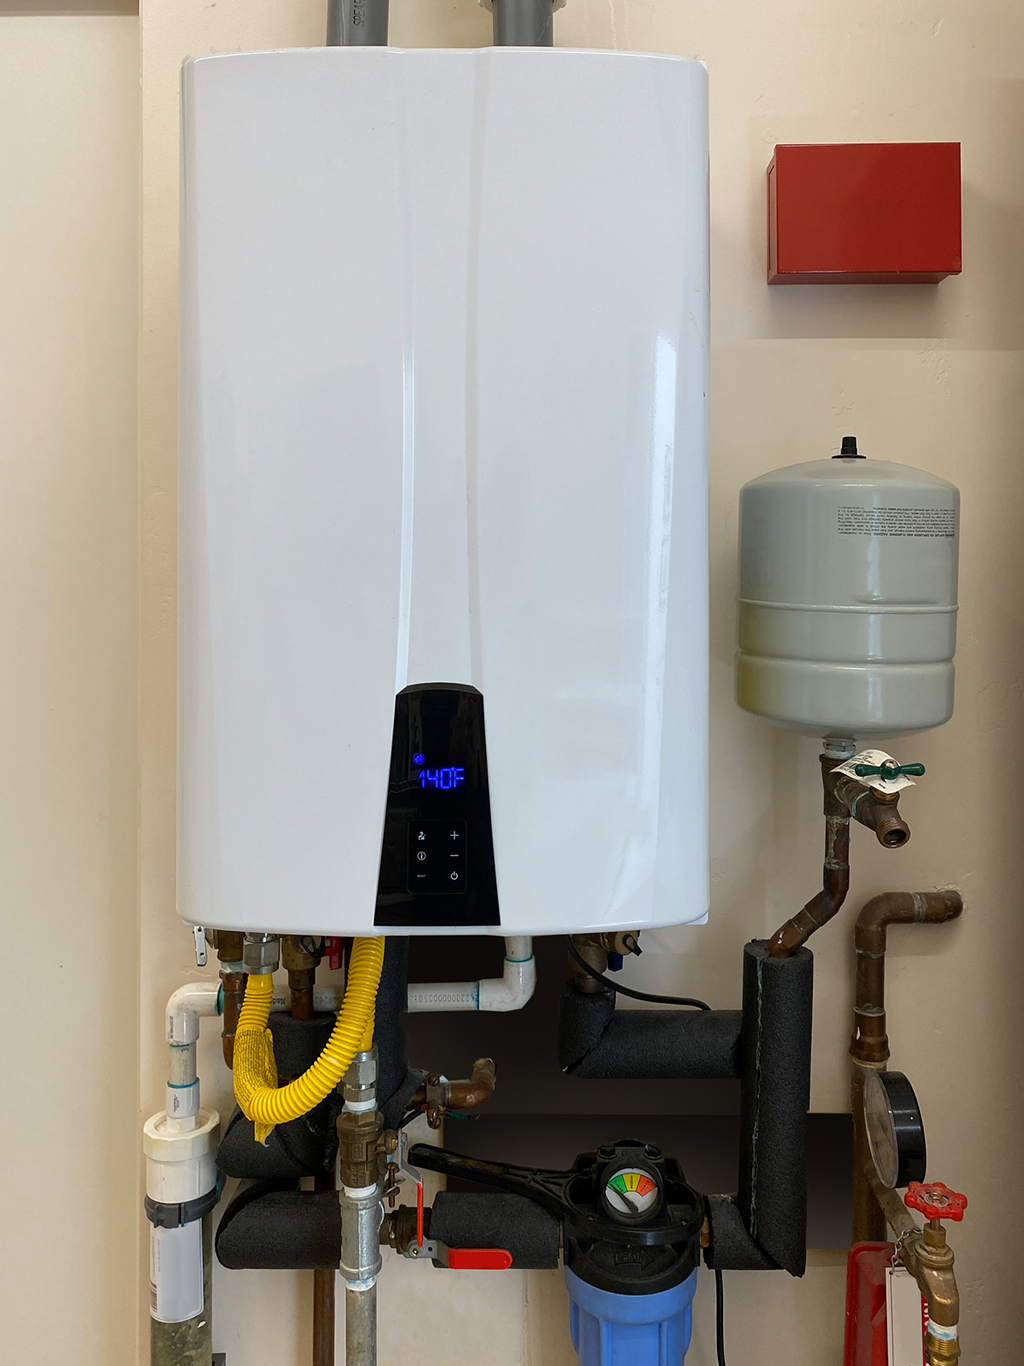 What Types Of Water Heater Units Require The Least Water Heater Repair? | Sugar Land, TX